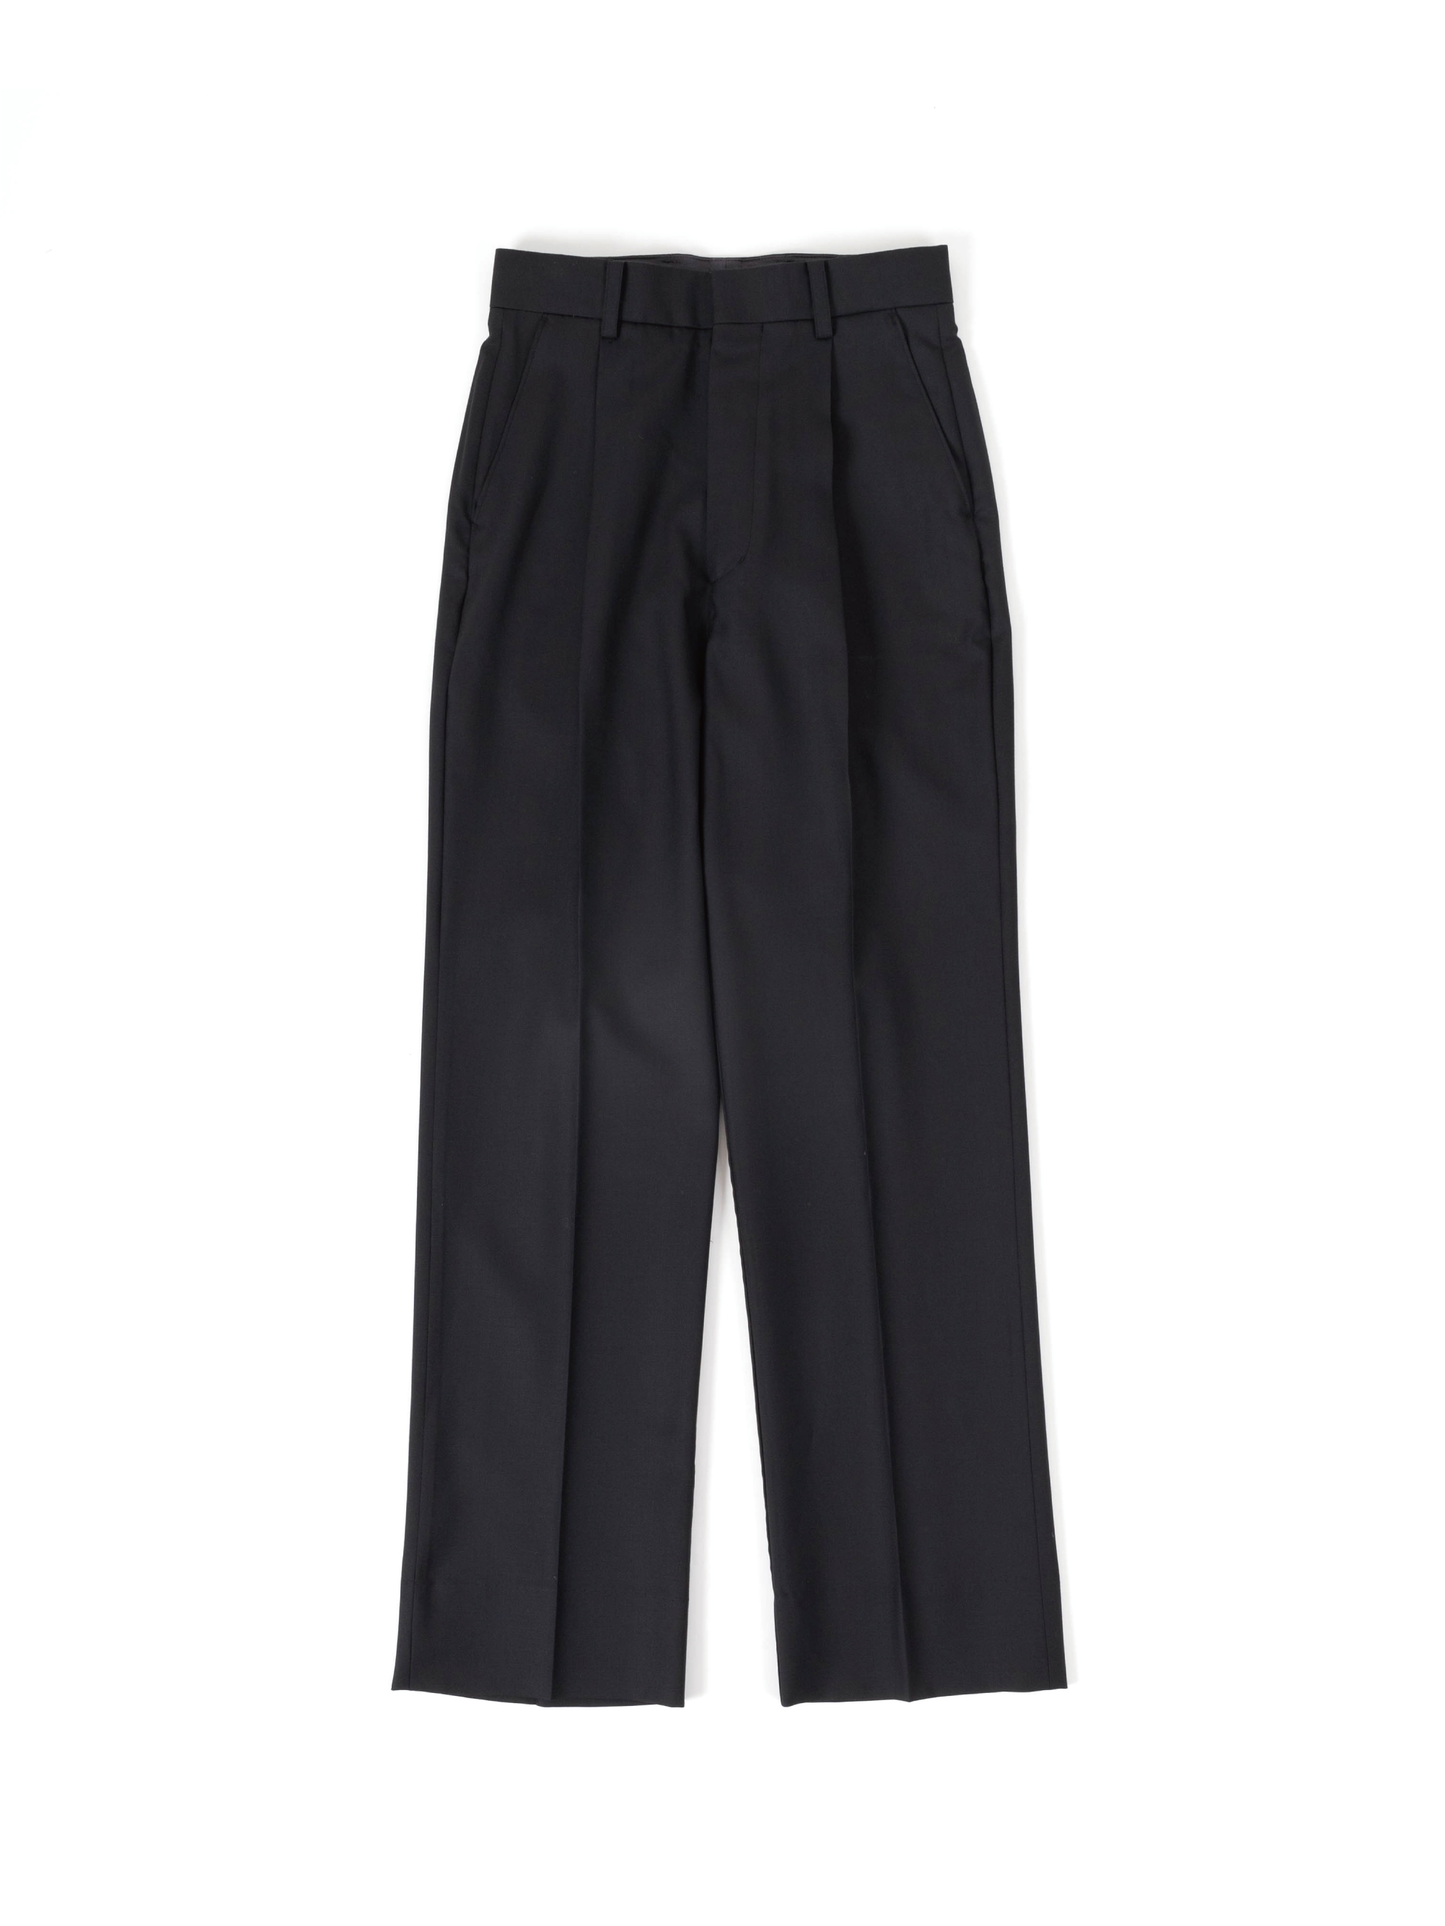 WORSTED WOOL PANTS for WOMEN｜MATTE BLACK